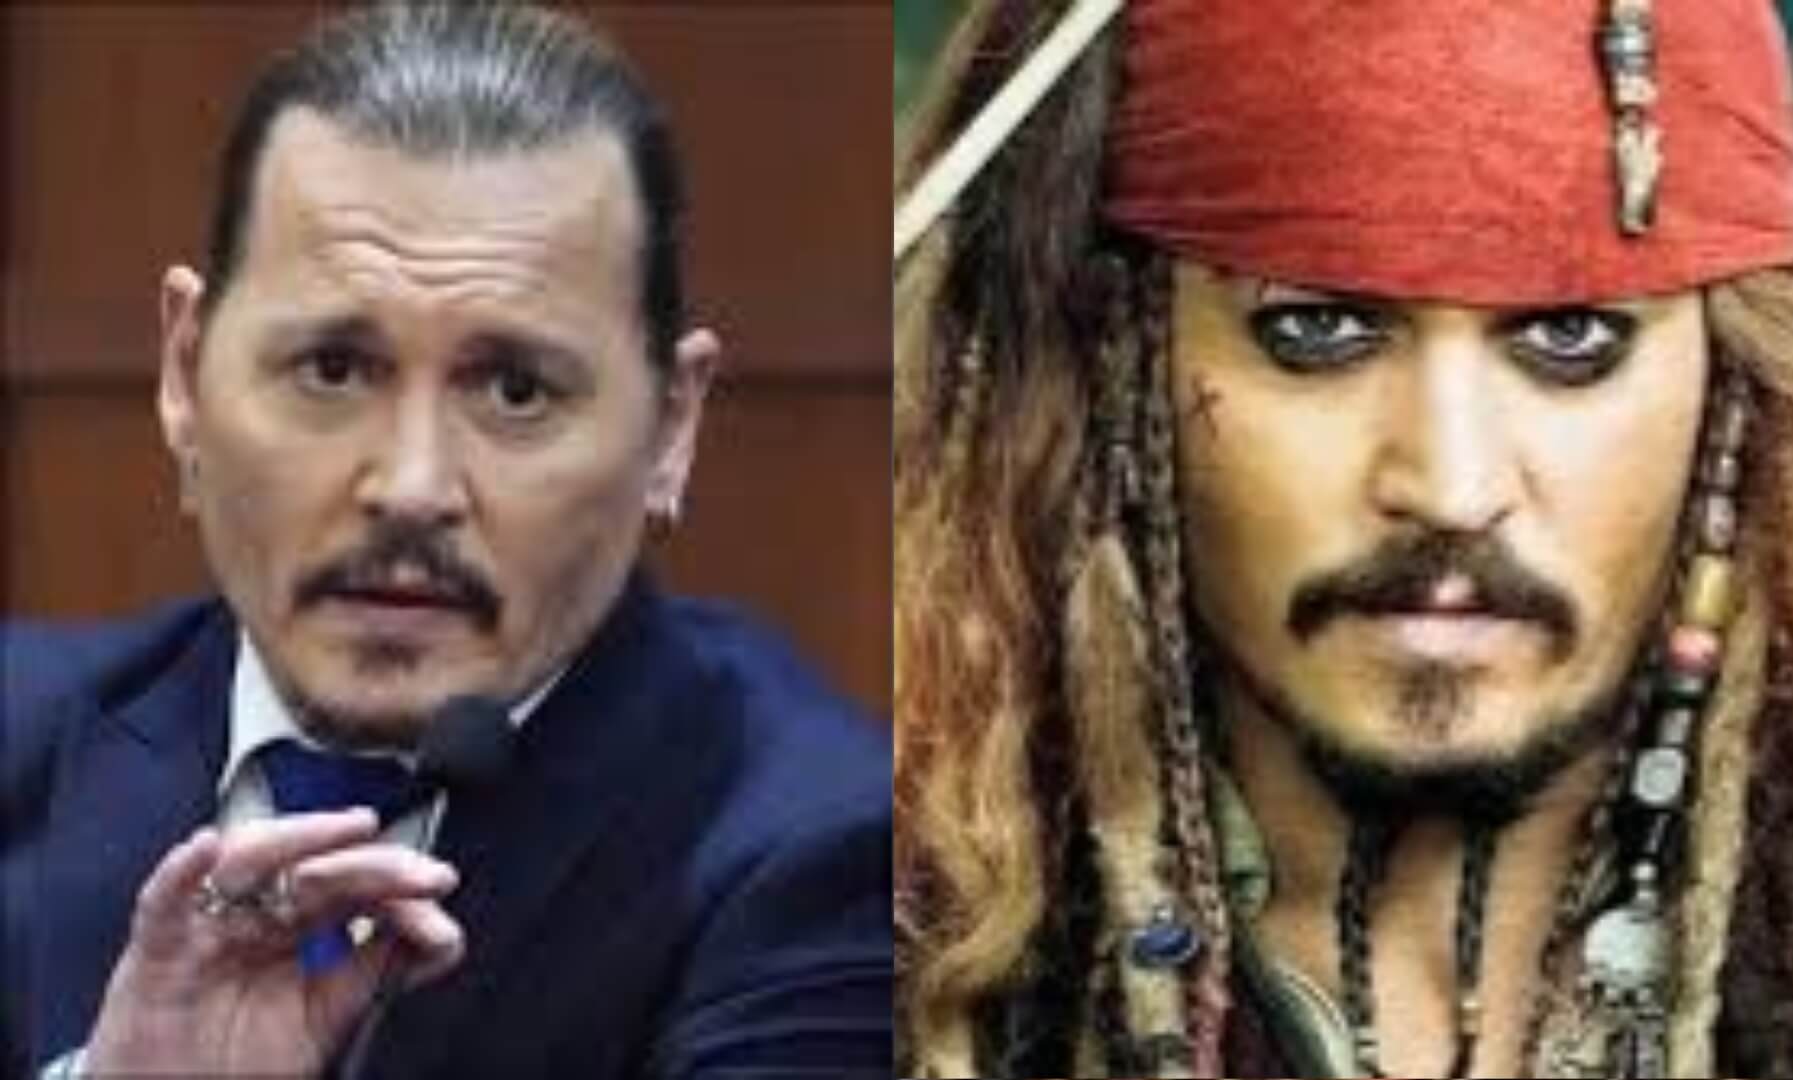 Johnny Depp, (Jack Sparrow in Pirates of the Caribbean) into Disney World. Is The Rs.535 crore offer real?